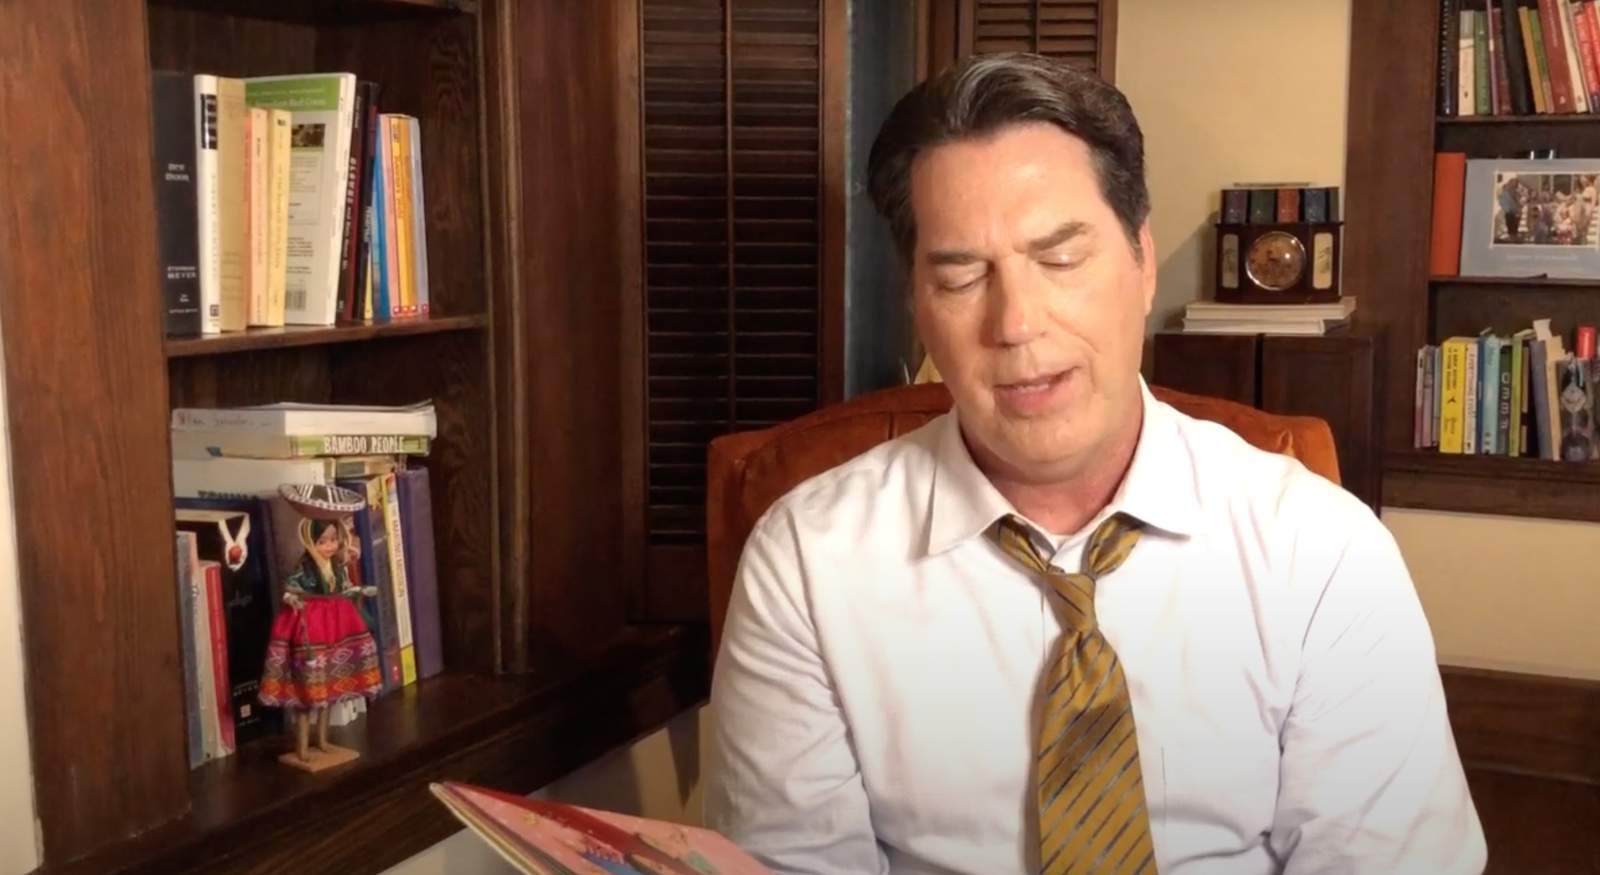 Spree Reads: KSAT anchor Steve Spriester reads What Can You Do With A Rebozo?